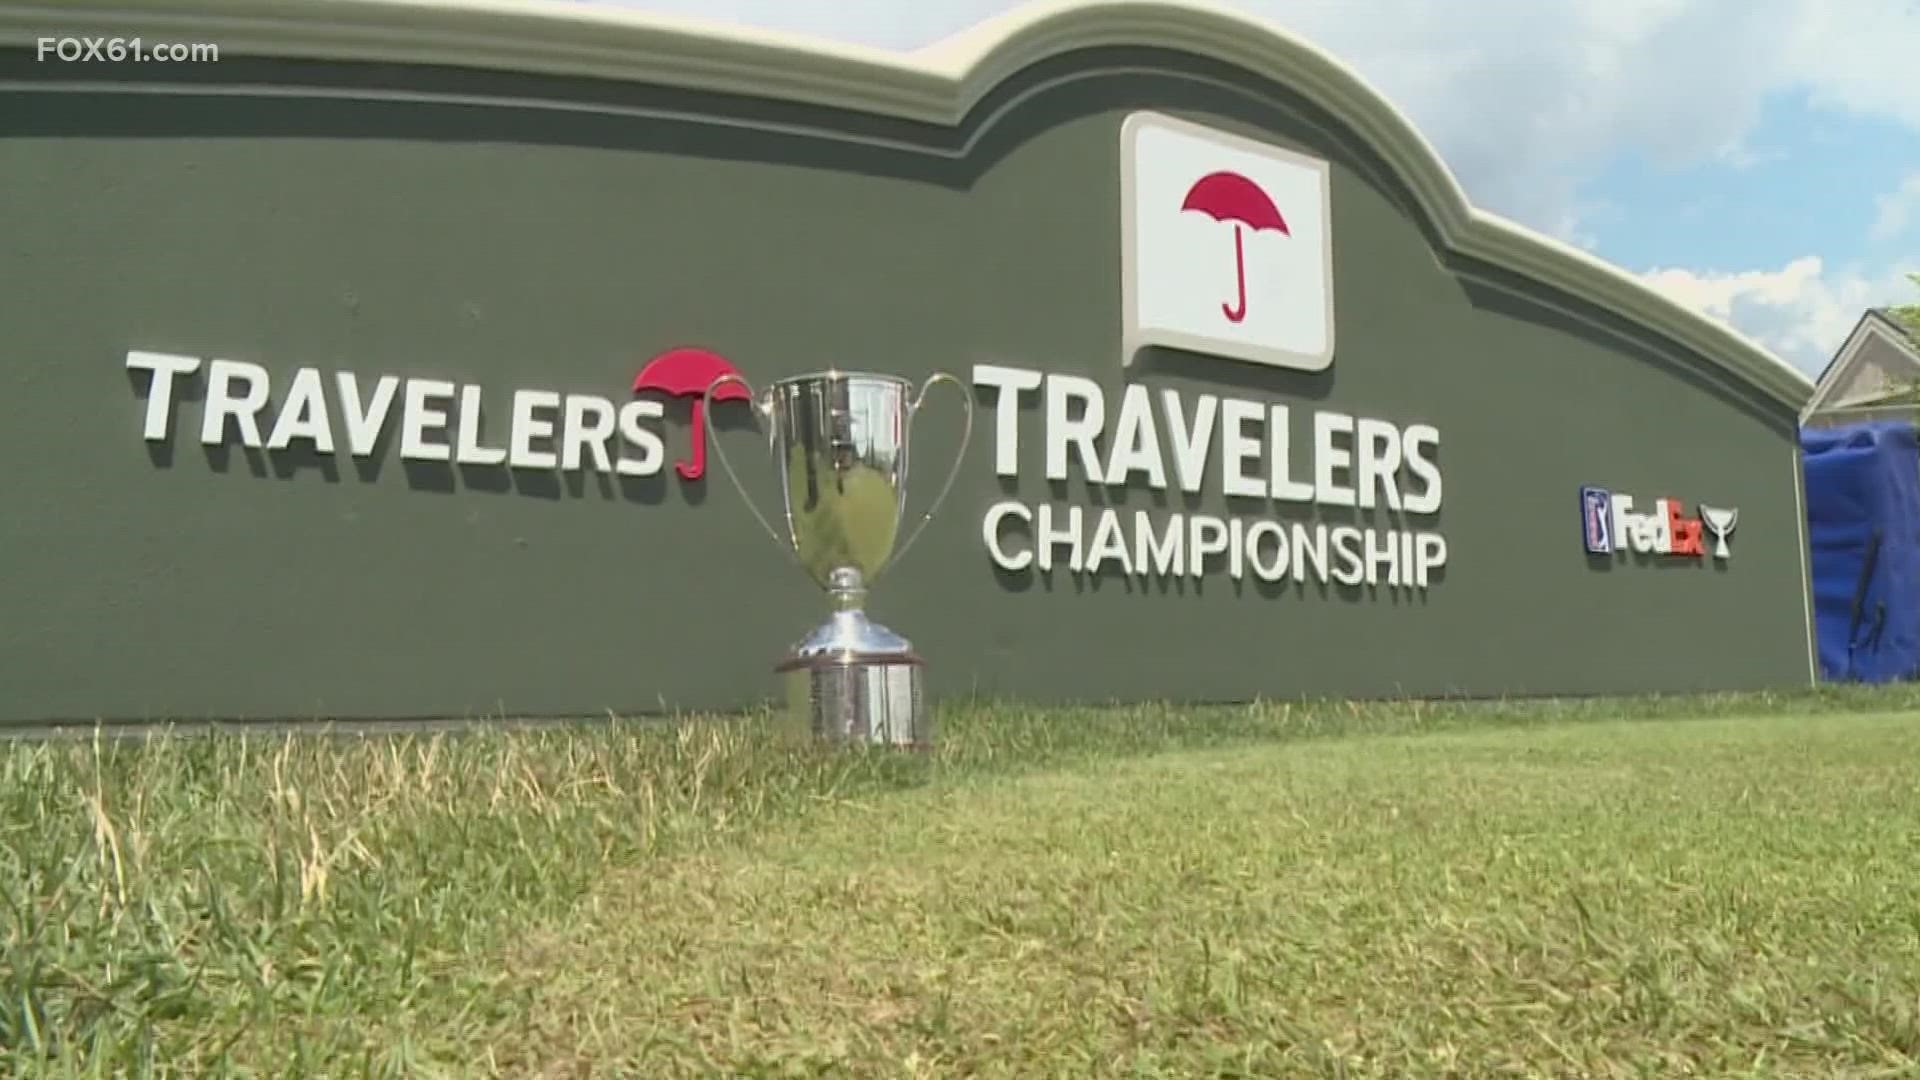 Everything you need to know about the 2023 Travelers Championship fox61